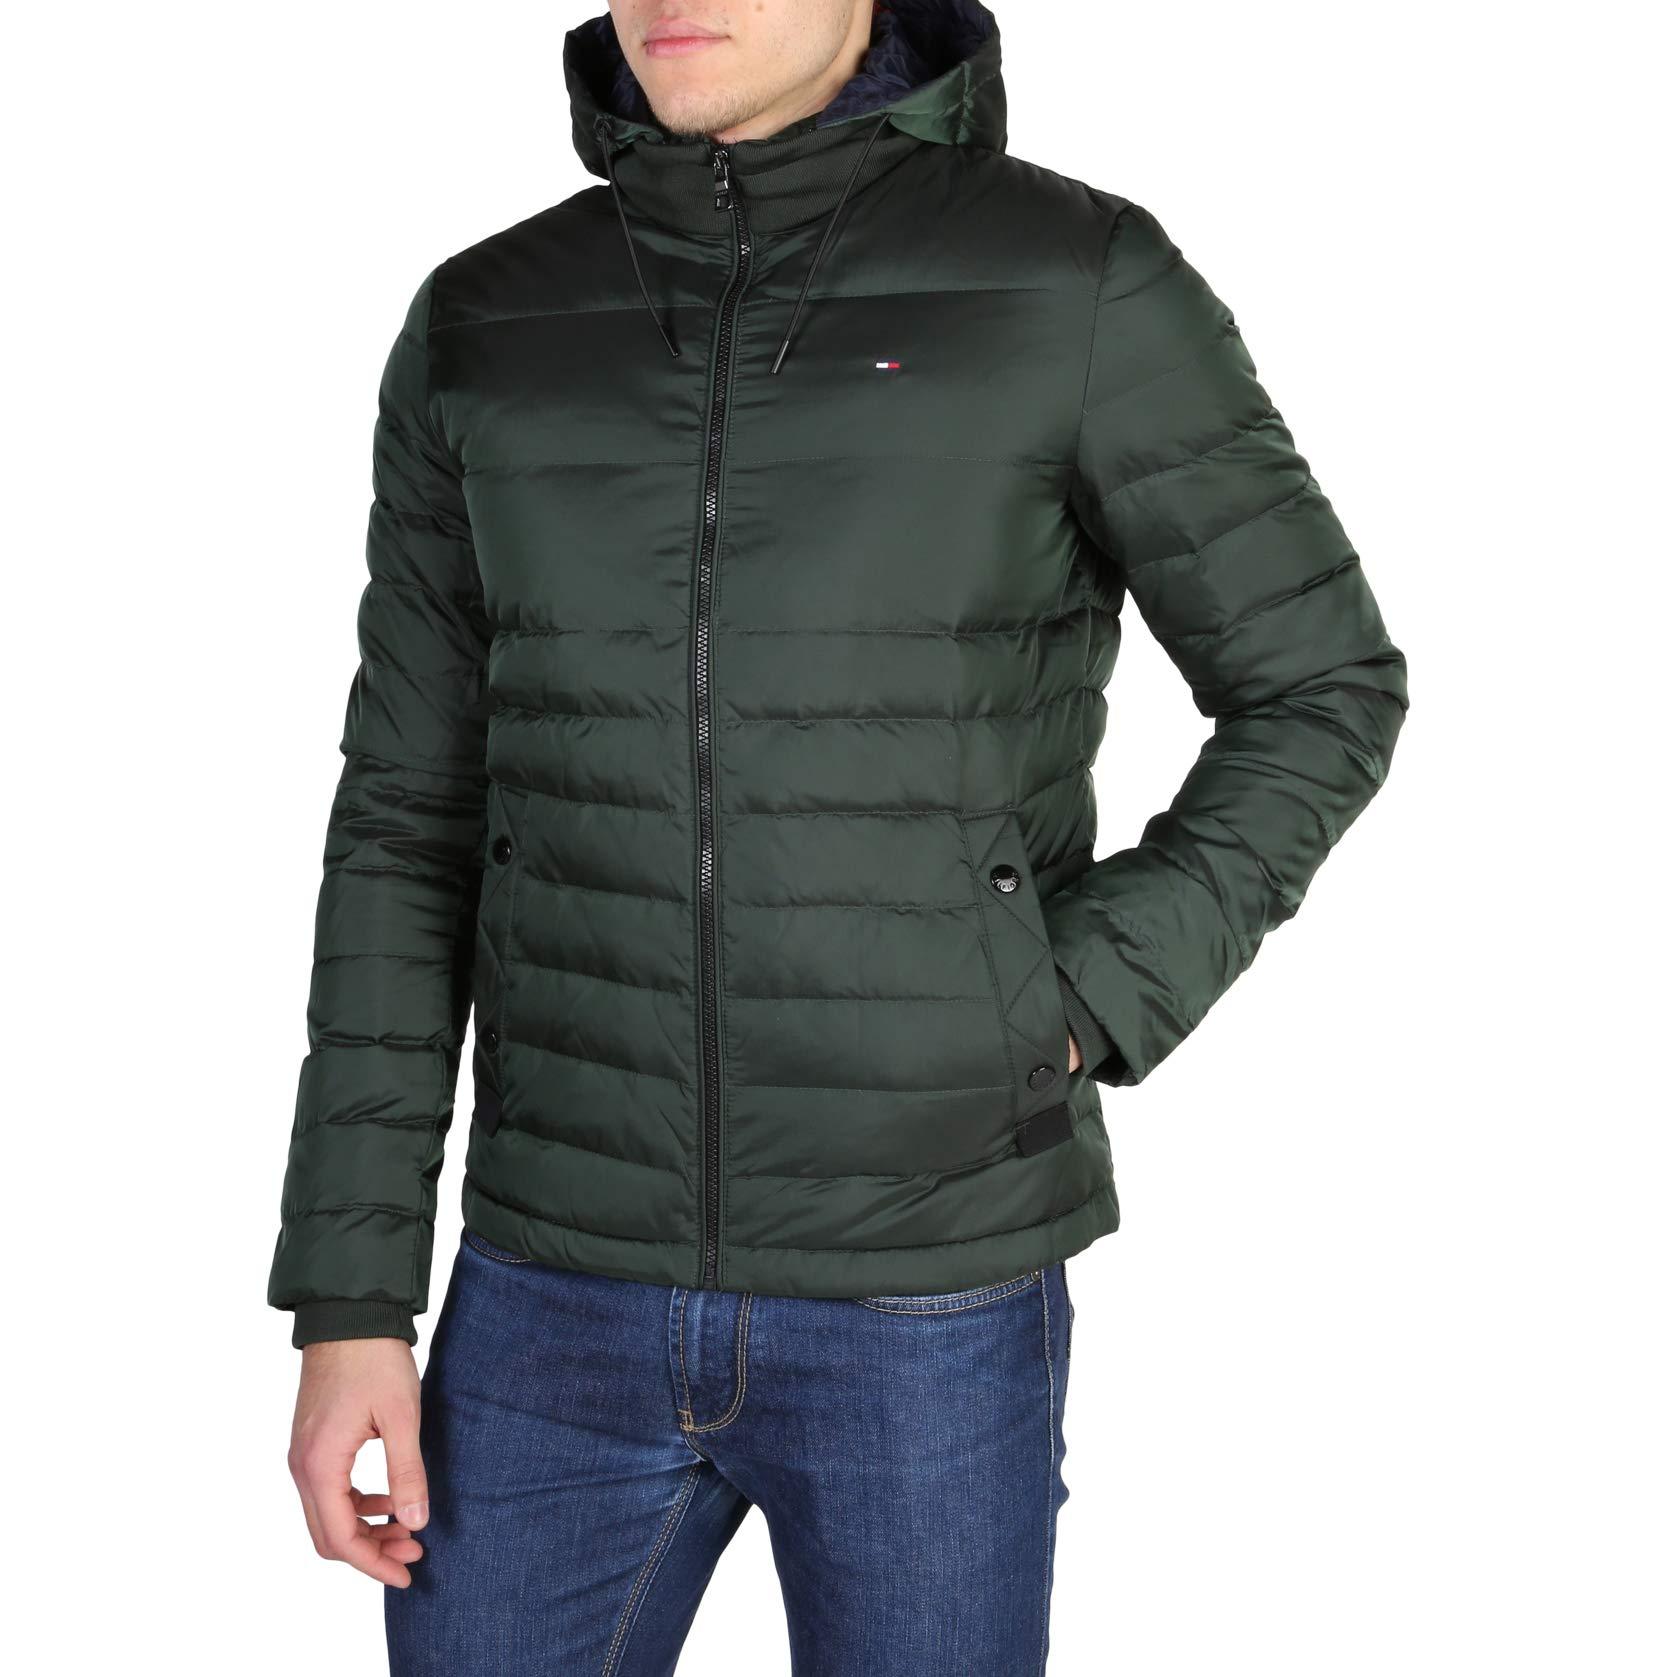 Tommy Hilfiger Chad Down Hdd Bomber Jacket in Green for Men - Lyst